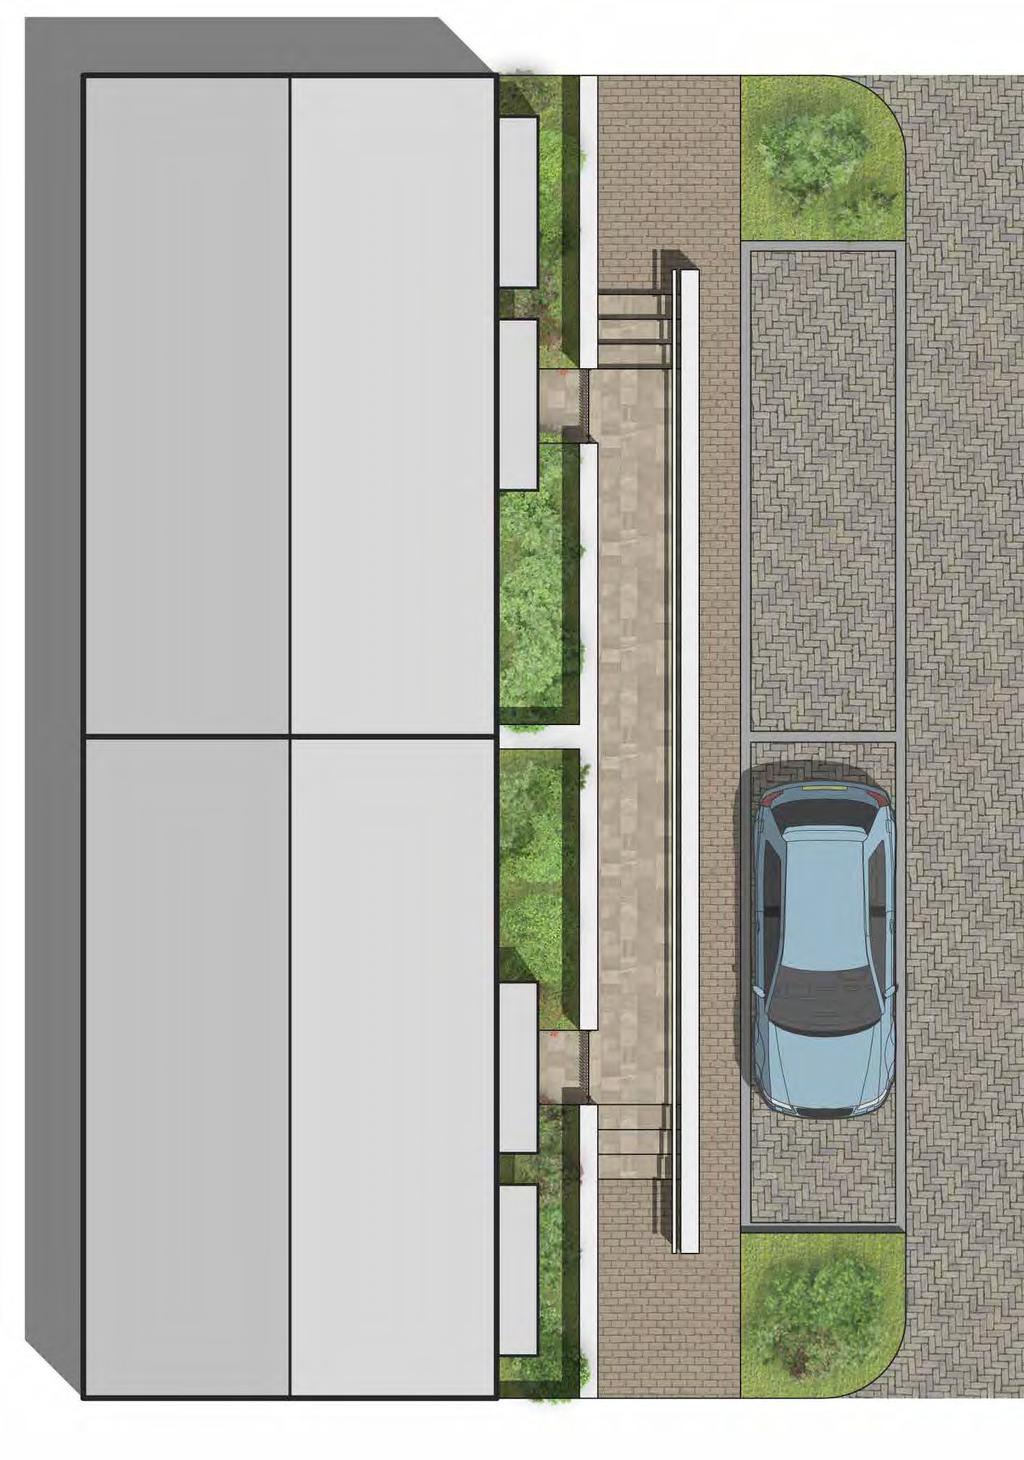 Proposed floor levels will be raised by approximately 600mm (to address flood issues) and